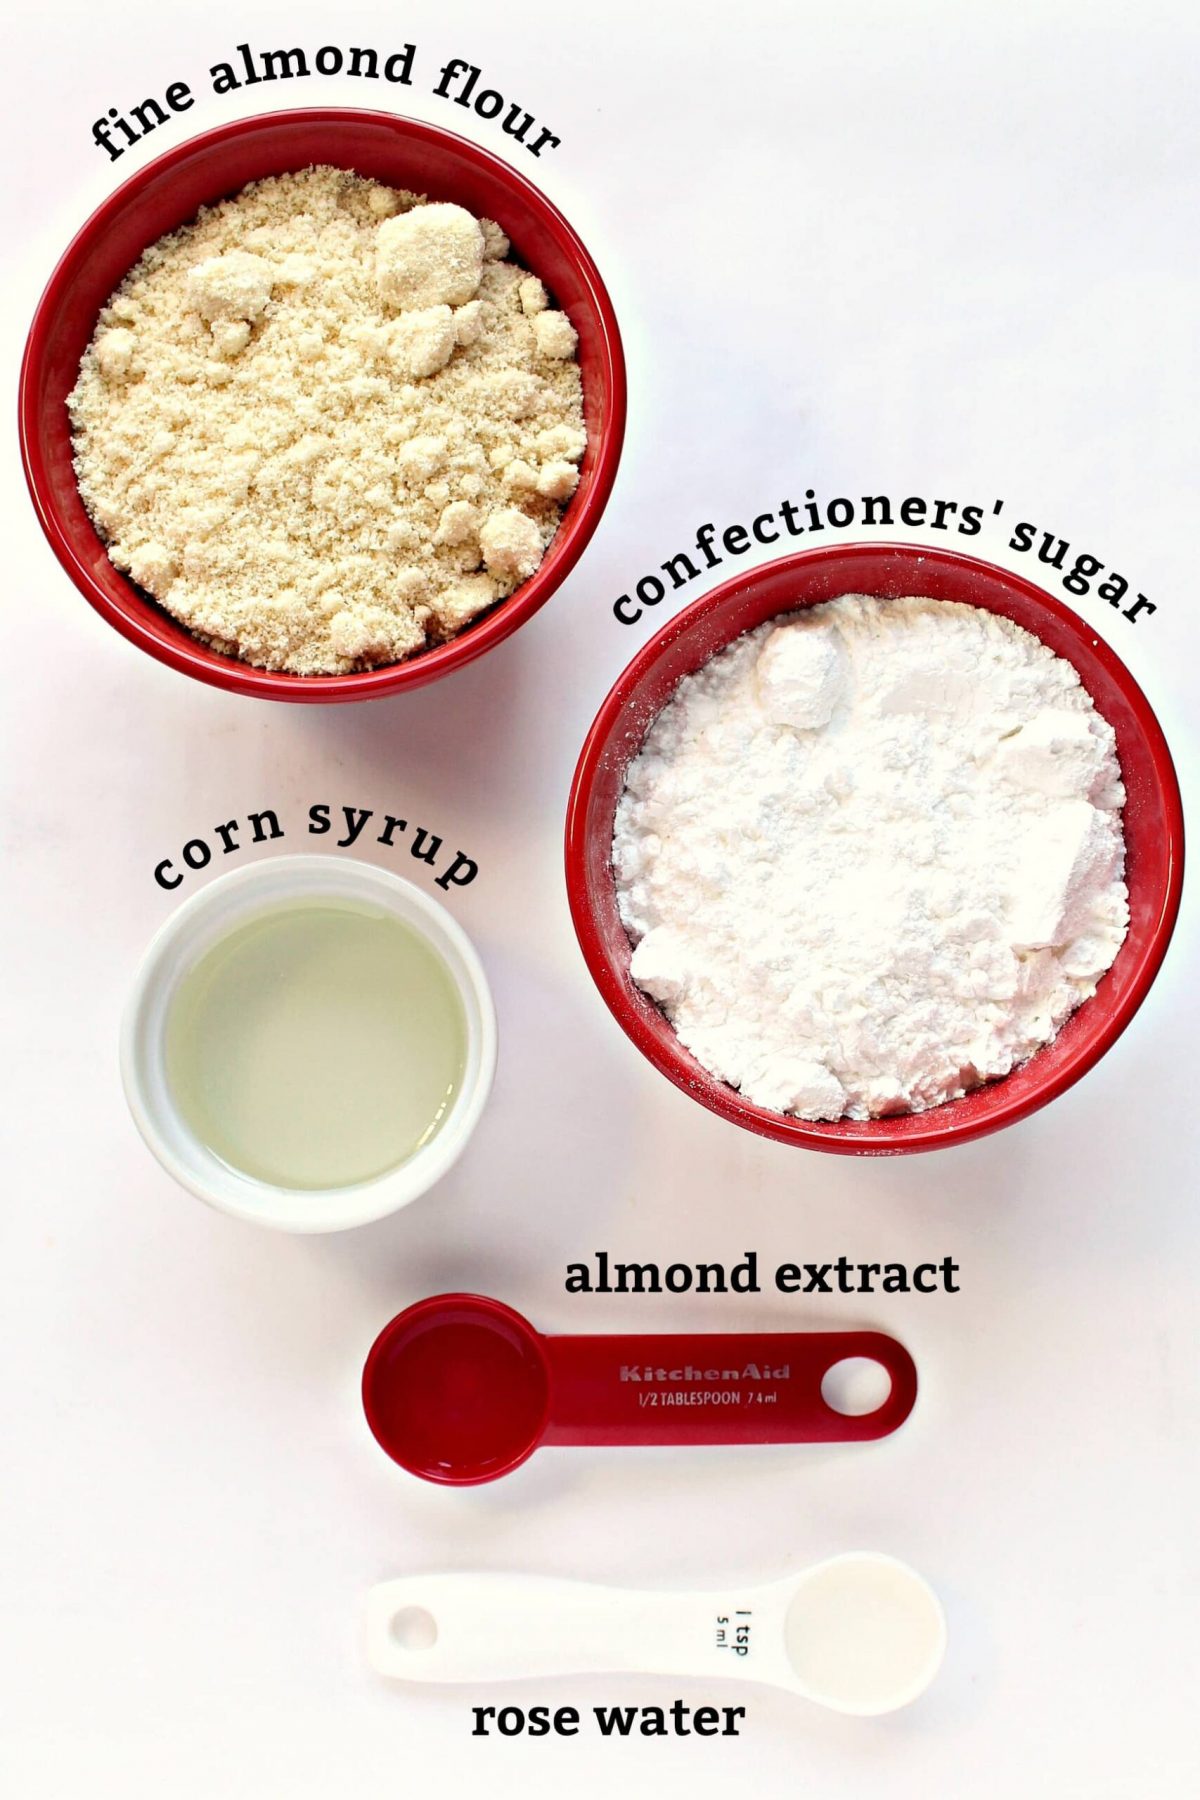 Recipe ingredients with text labels: fine ground almond flour, confectioners' sugar, corn syrup, almond extract.